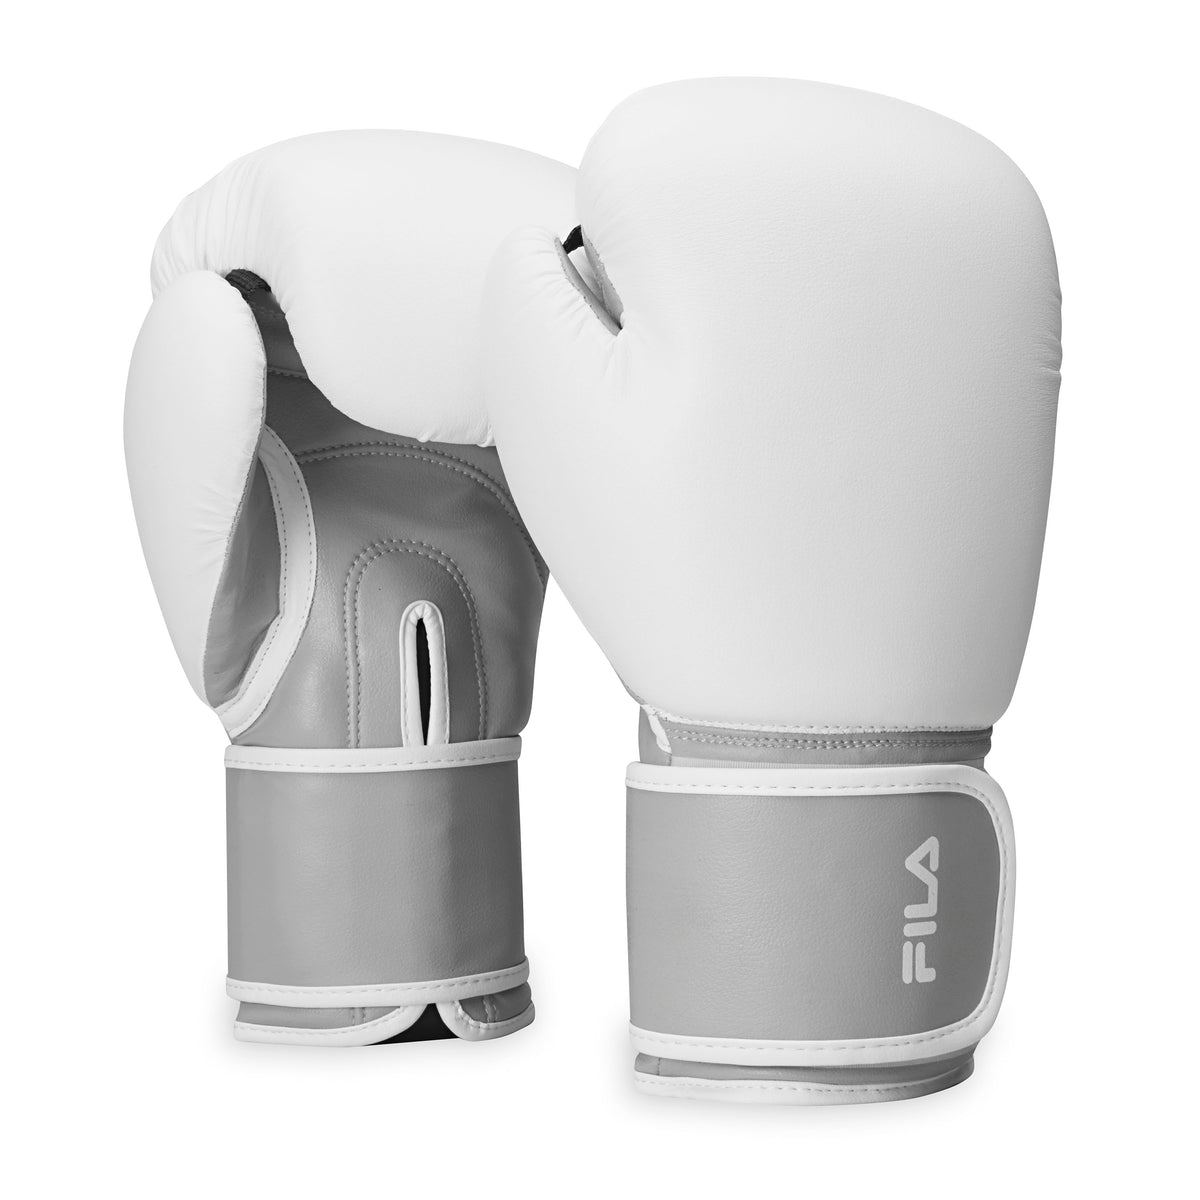 FILA Boxing Gloves (8oz) White/Grey both gloves front and back